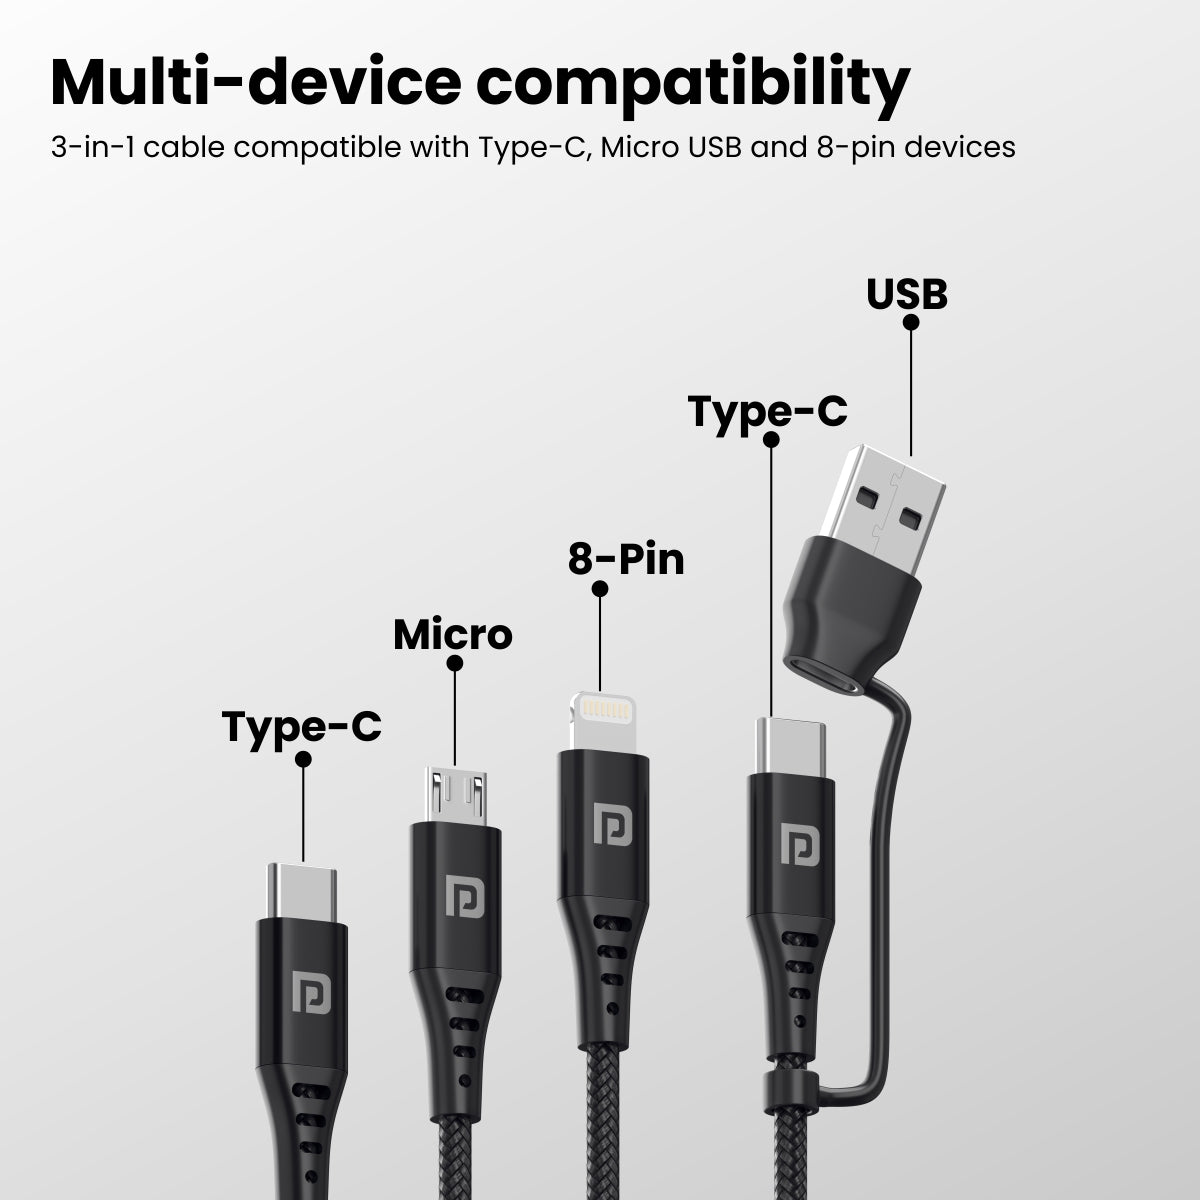 Black Portronics Konnect J9 3-in-1 USB cable has Type-C, Micro USB and 8-pin